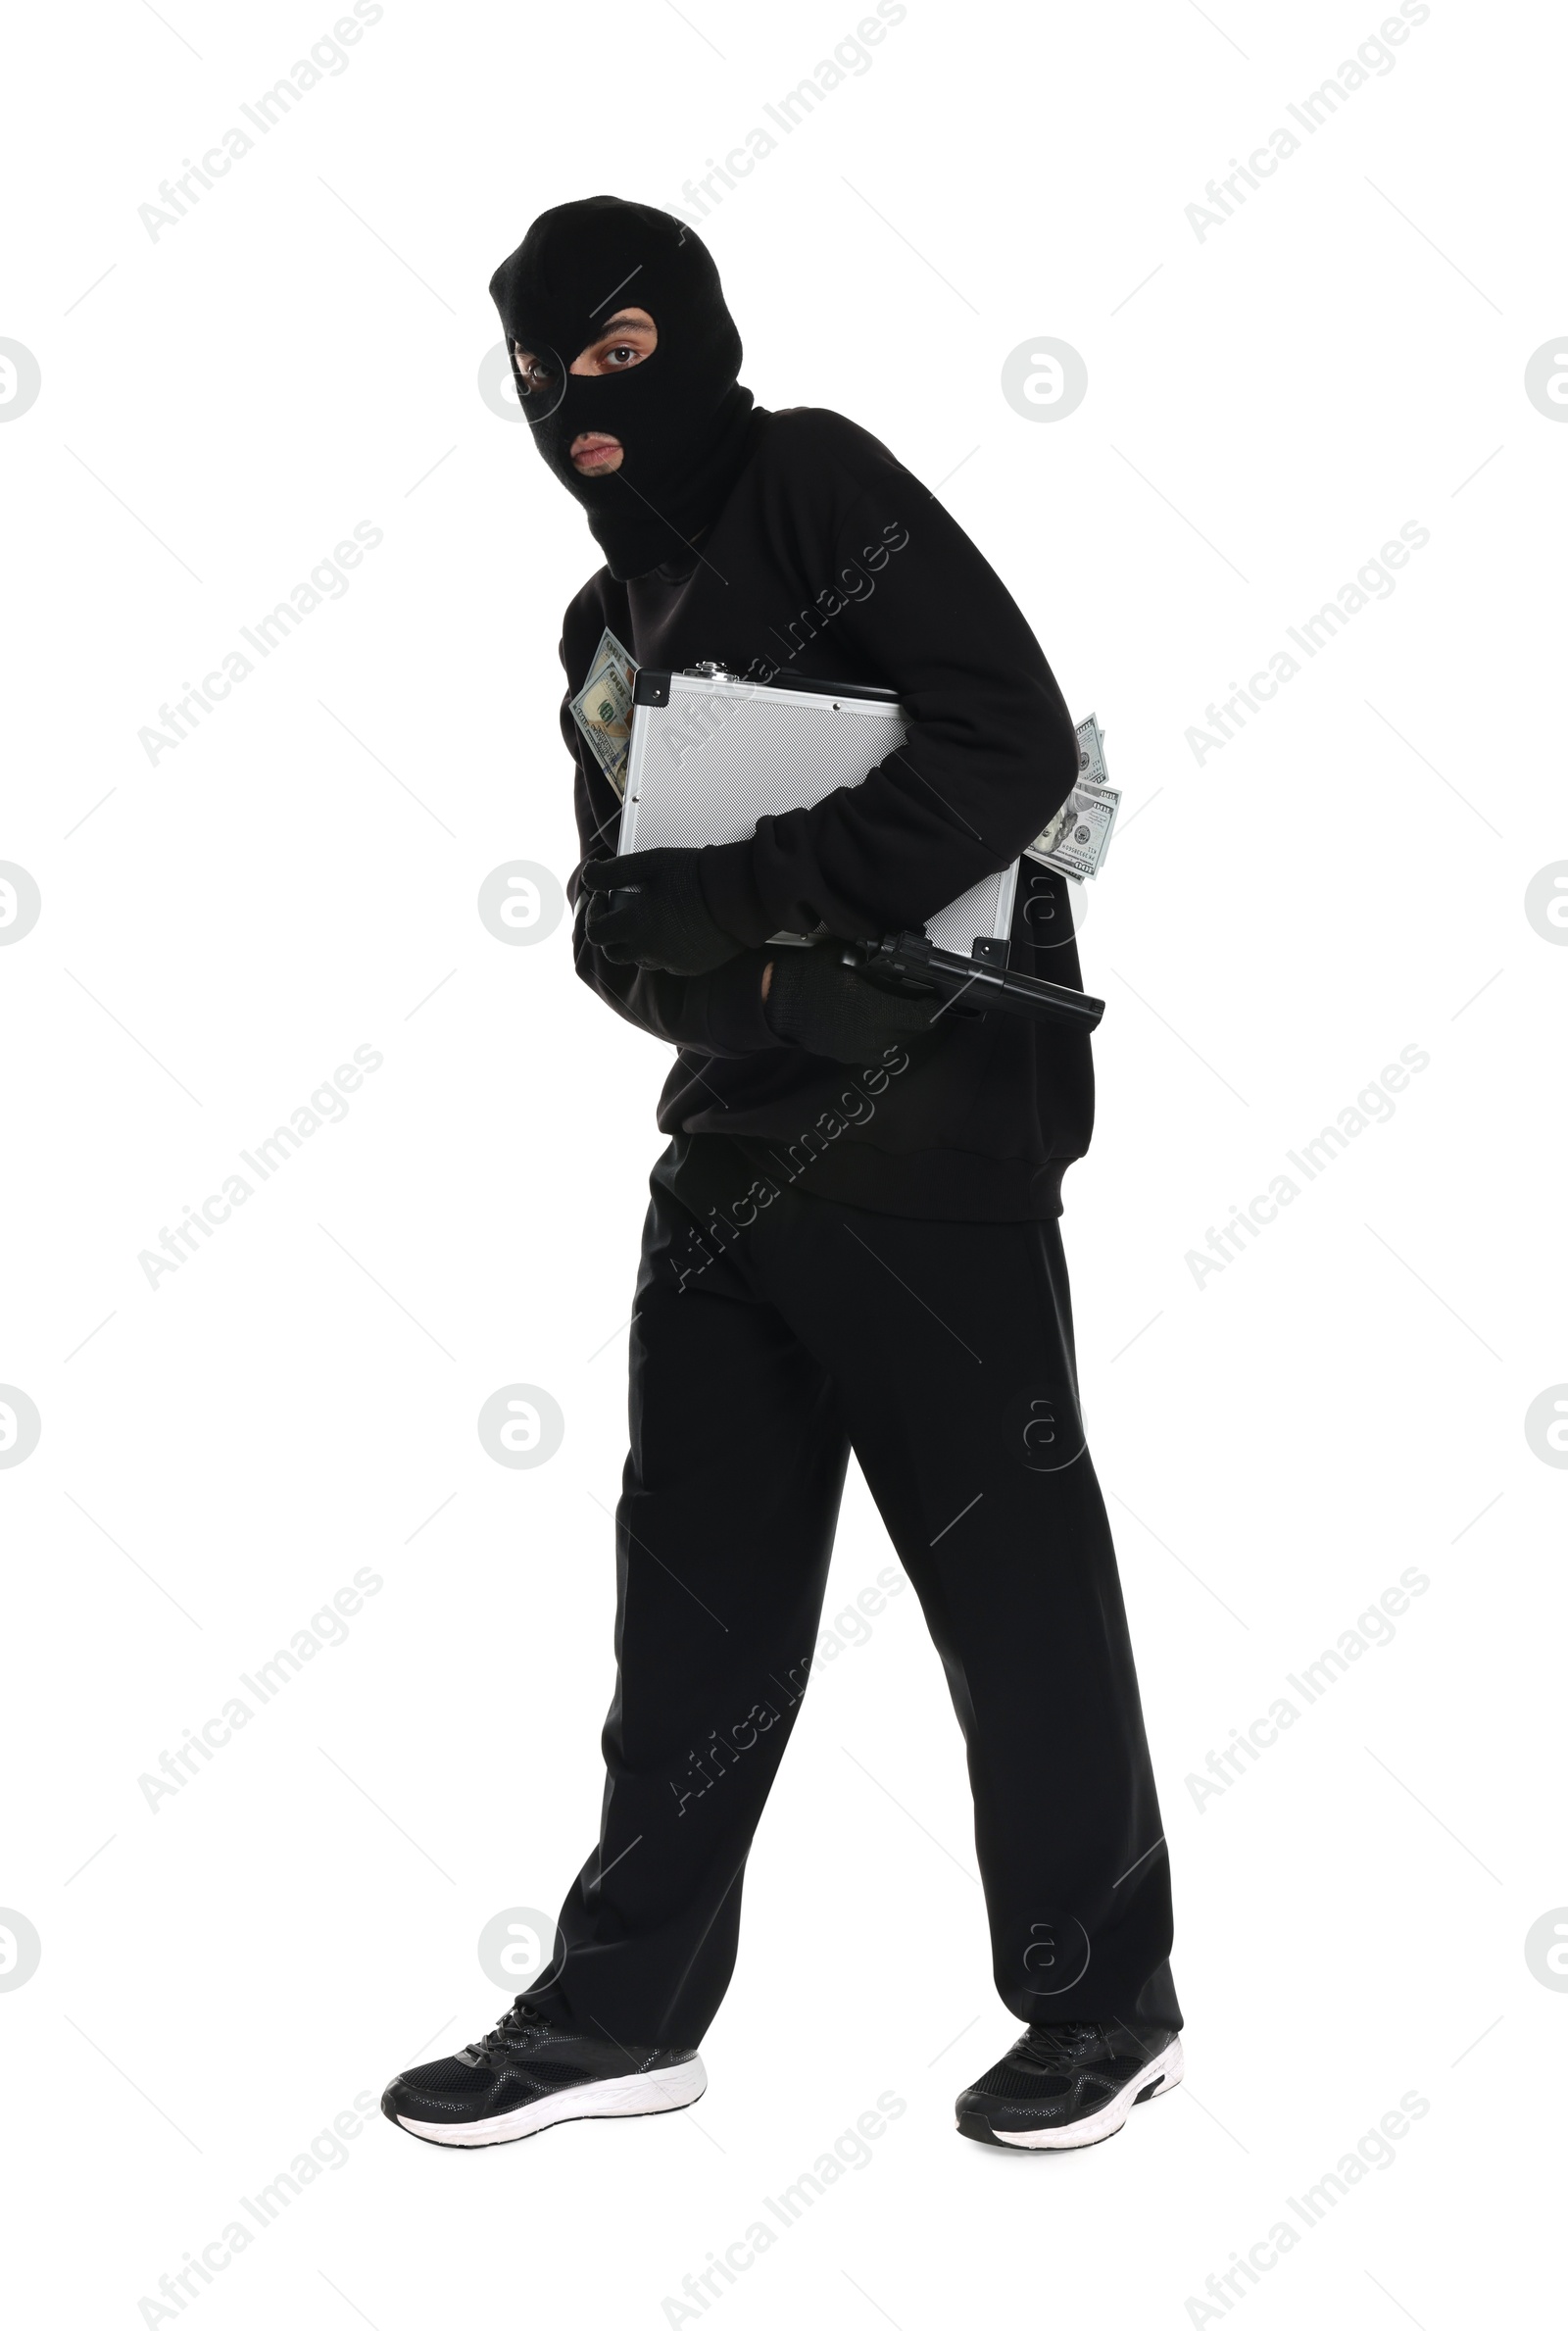 Photo of Thief in balaclava with gun and briefcase of money on white background